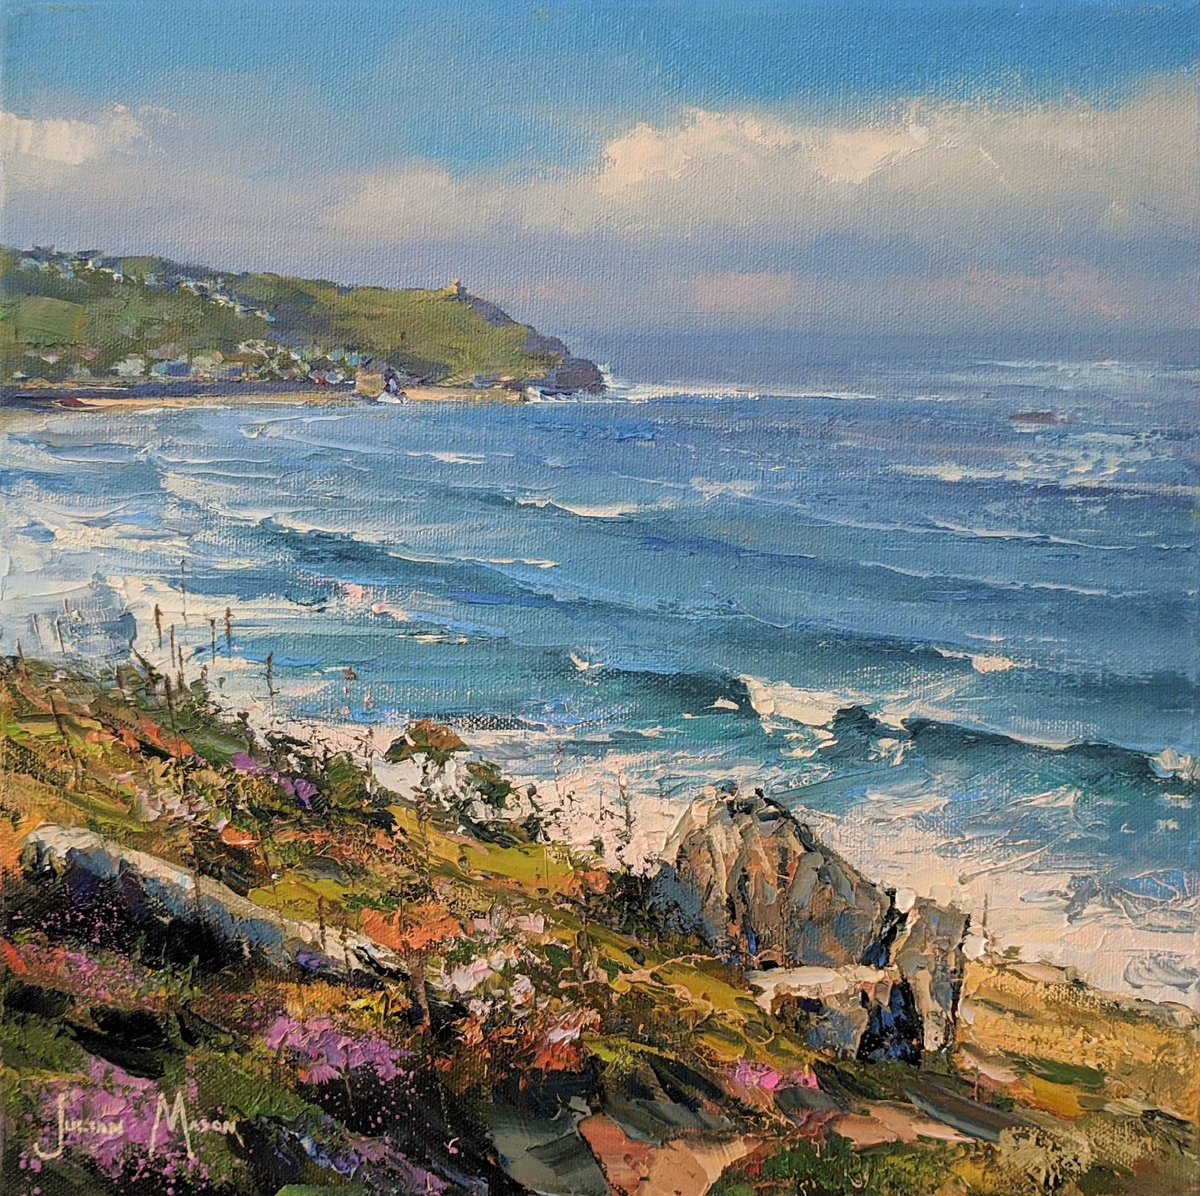 Just how pretty is this superb Julian Mason that sold this week? I know, right? But there’re more here:
theharbourgallery.co.uk/julian-mason 

#julianmason #sennen #sennencove #cornwall #cornishart #cornishpainting #oilpainting #contemporaryart #contemporarybritishpainter